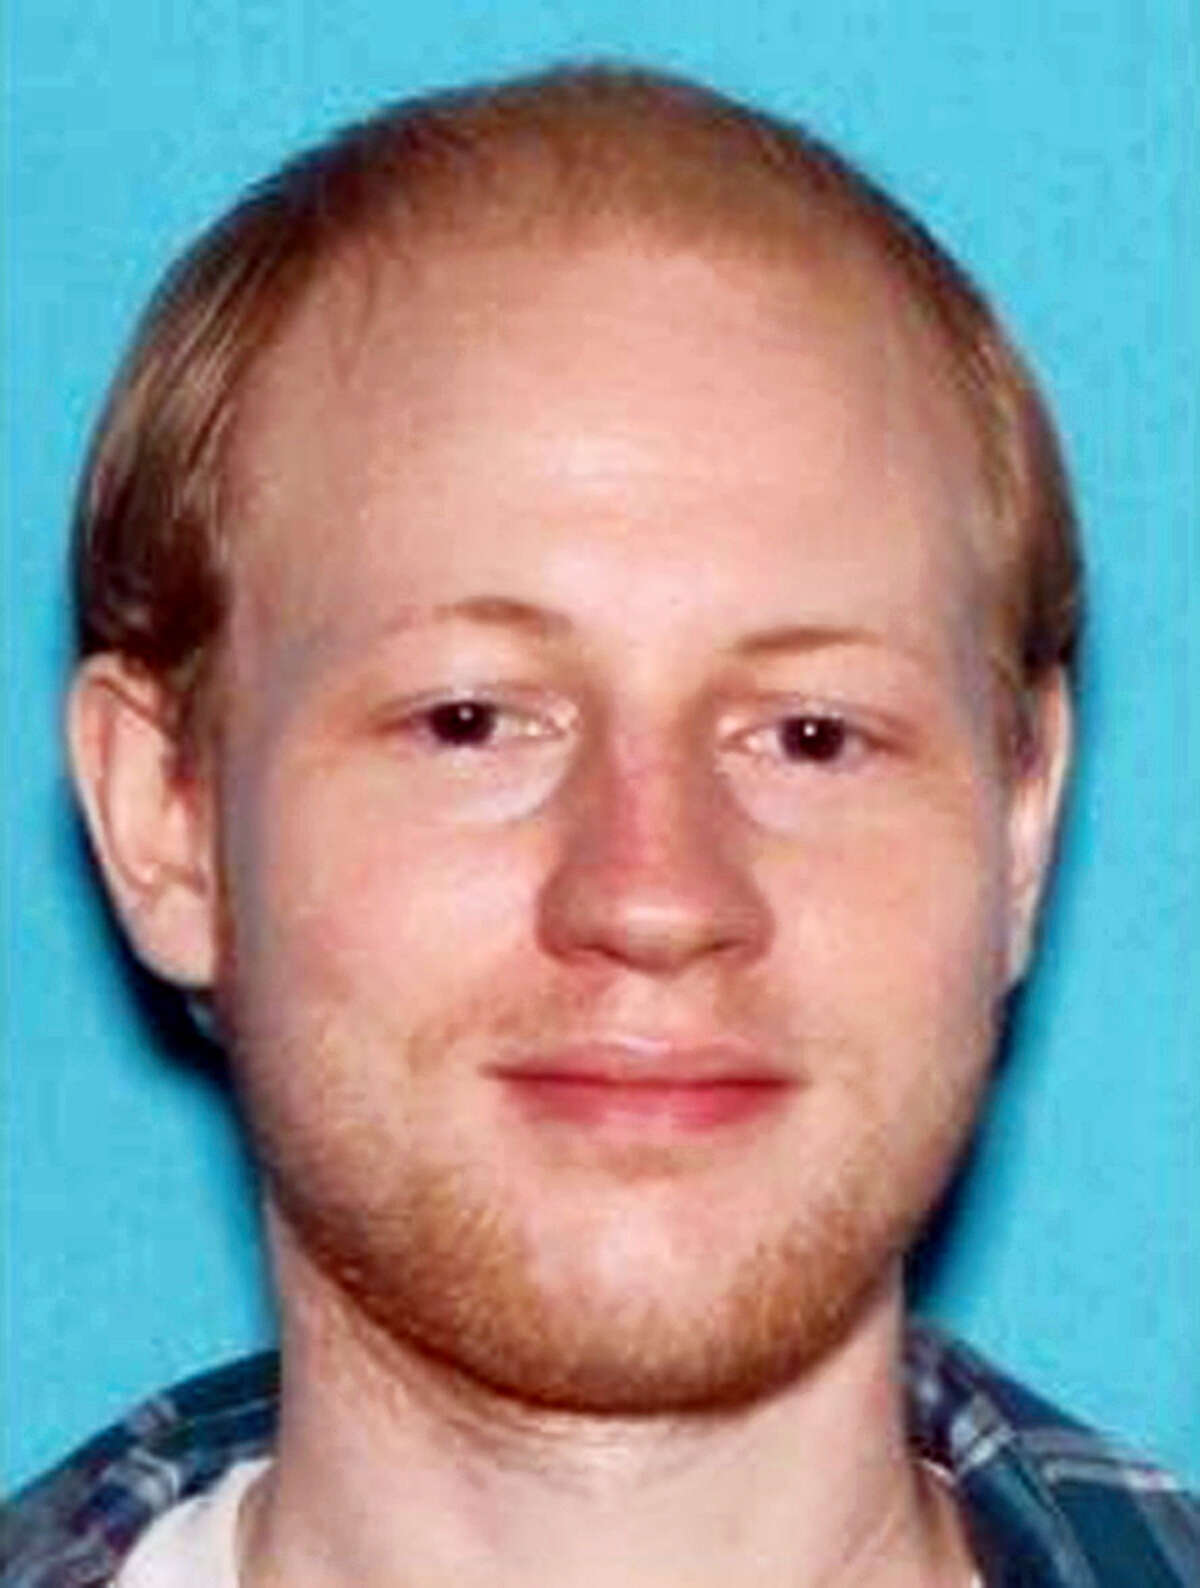 This undated photo released by the Orlando Police shows Kevin James Loibl. Authorities said Saturday, June 11, 2016, Loibl has been identified as the gunman who shot and killed Christina Grimmie, a singer who rose to fame after appearing on “The Voice.”